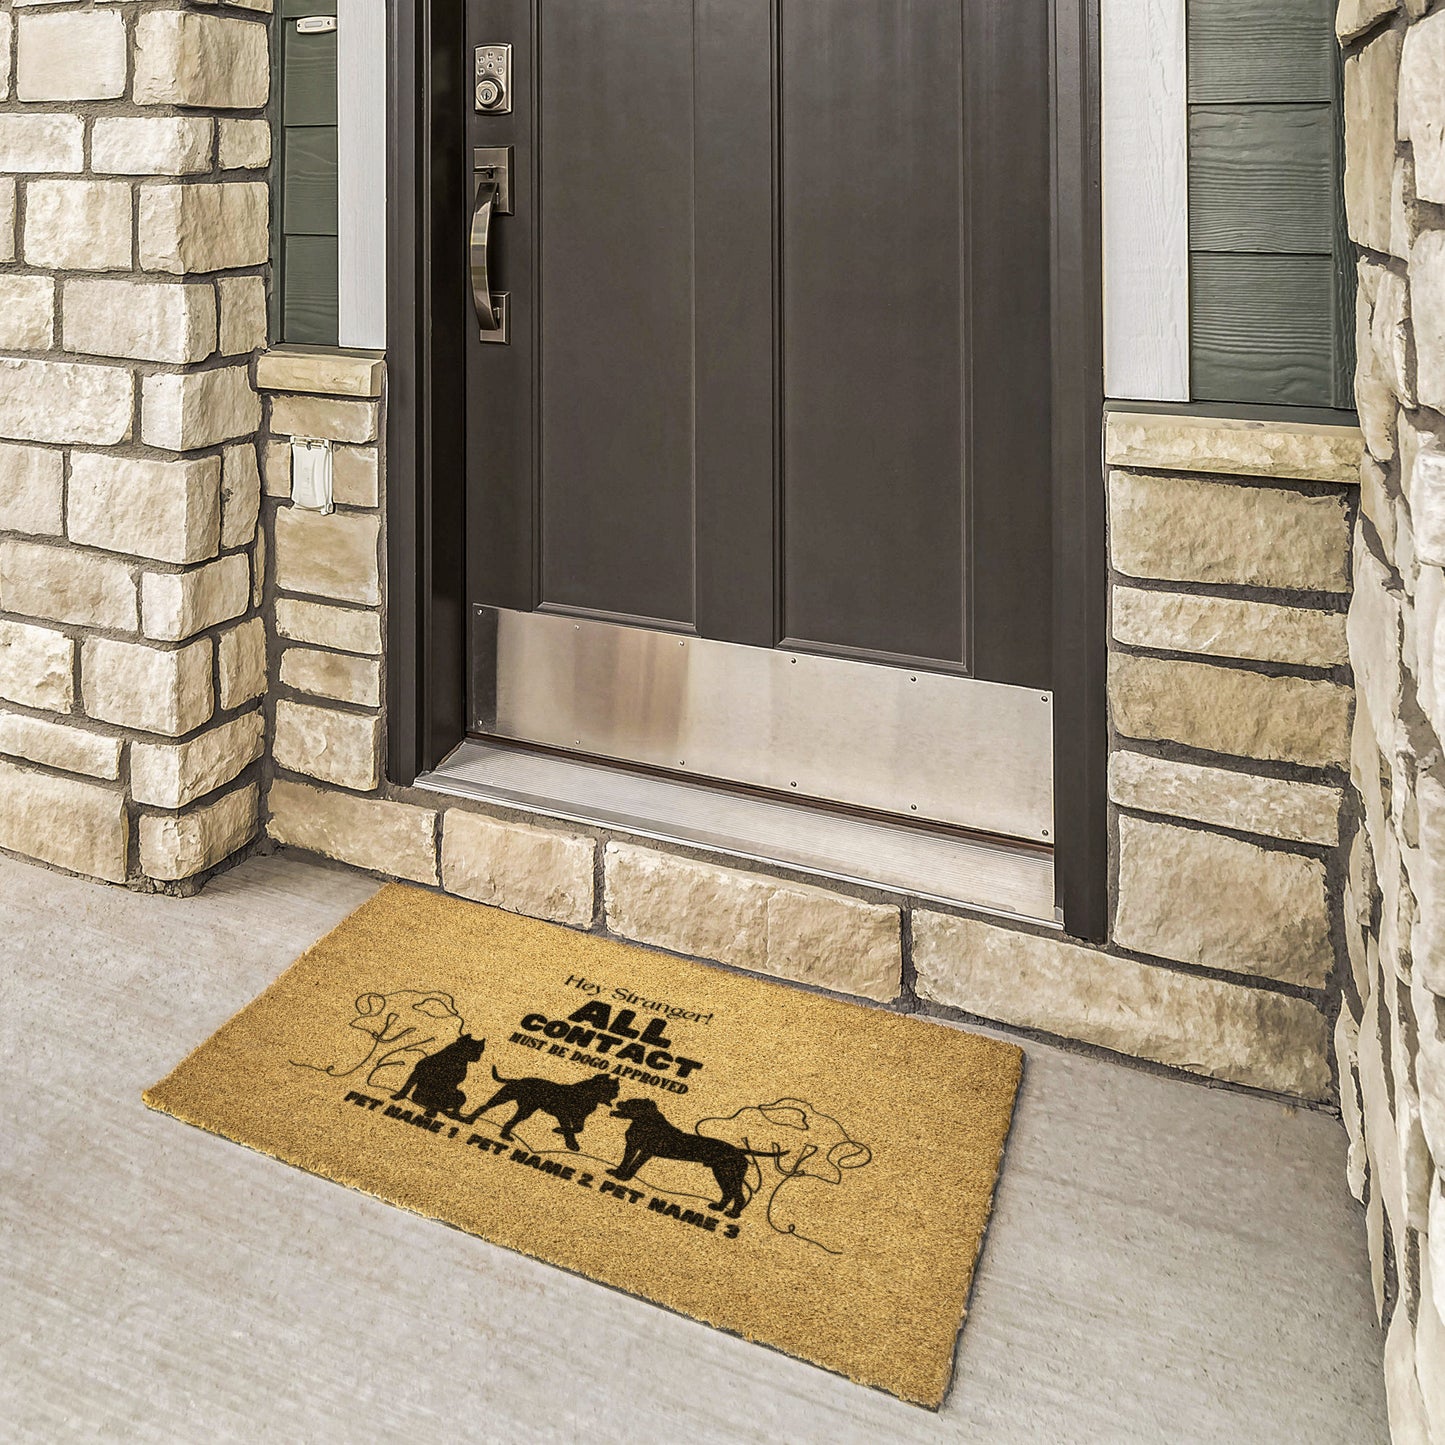 Hey Stranger Personalized 3 Dogo Welcome Mat